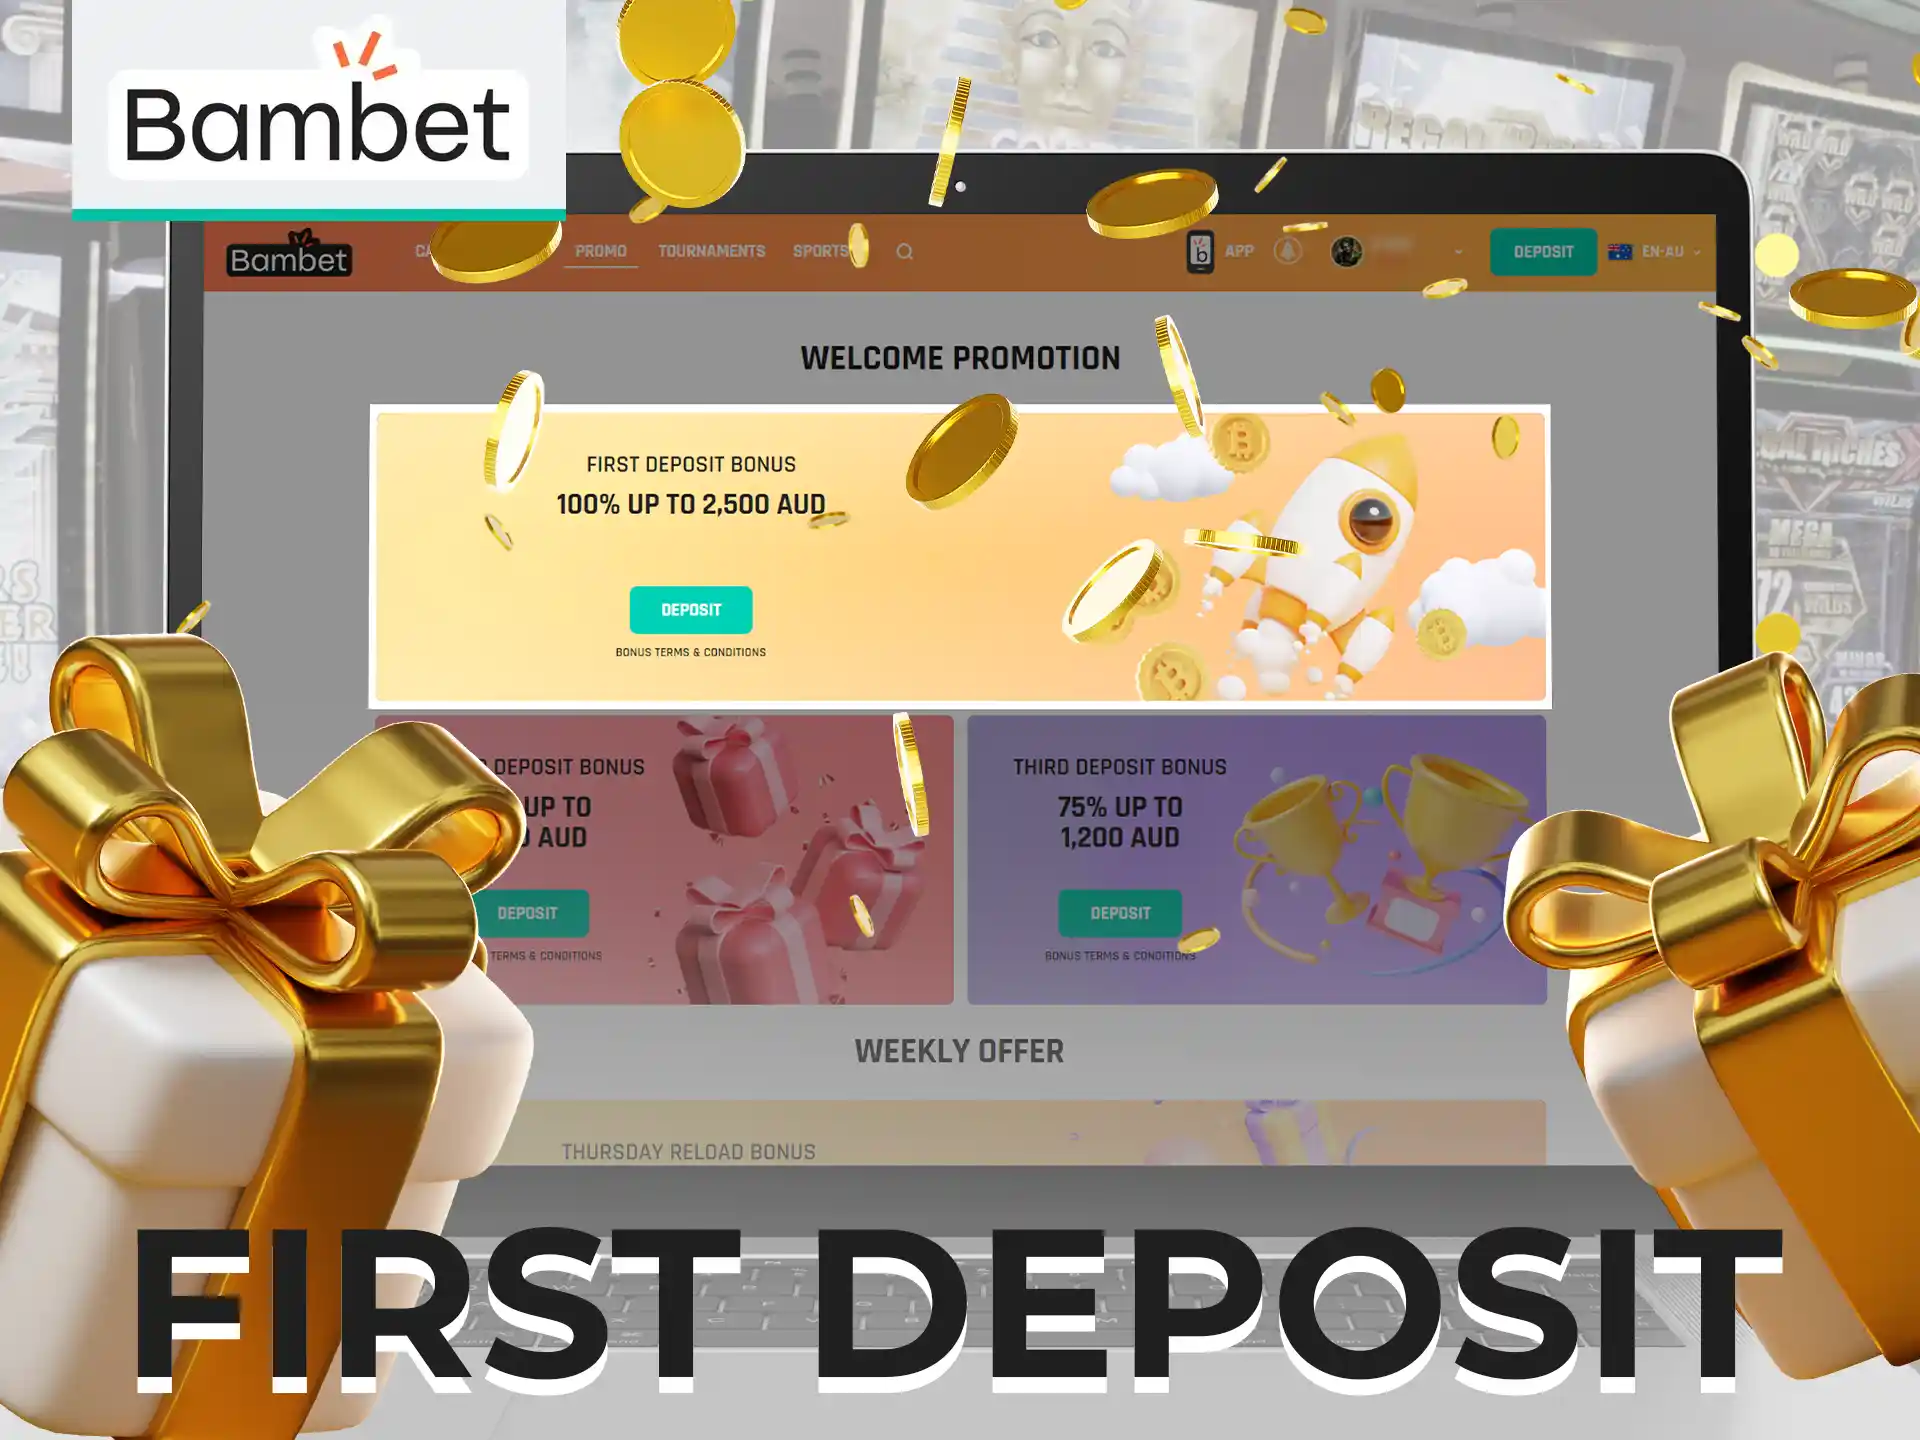 First deposit welcome bonus with maximum winnings up to AUD 2,500 at Bambet.